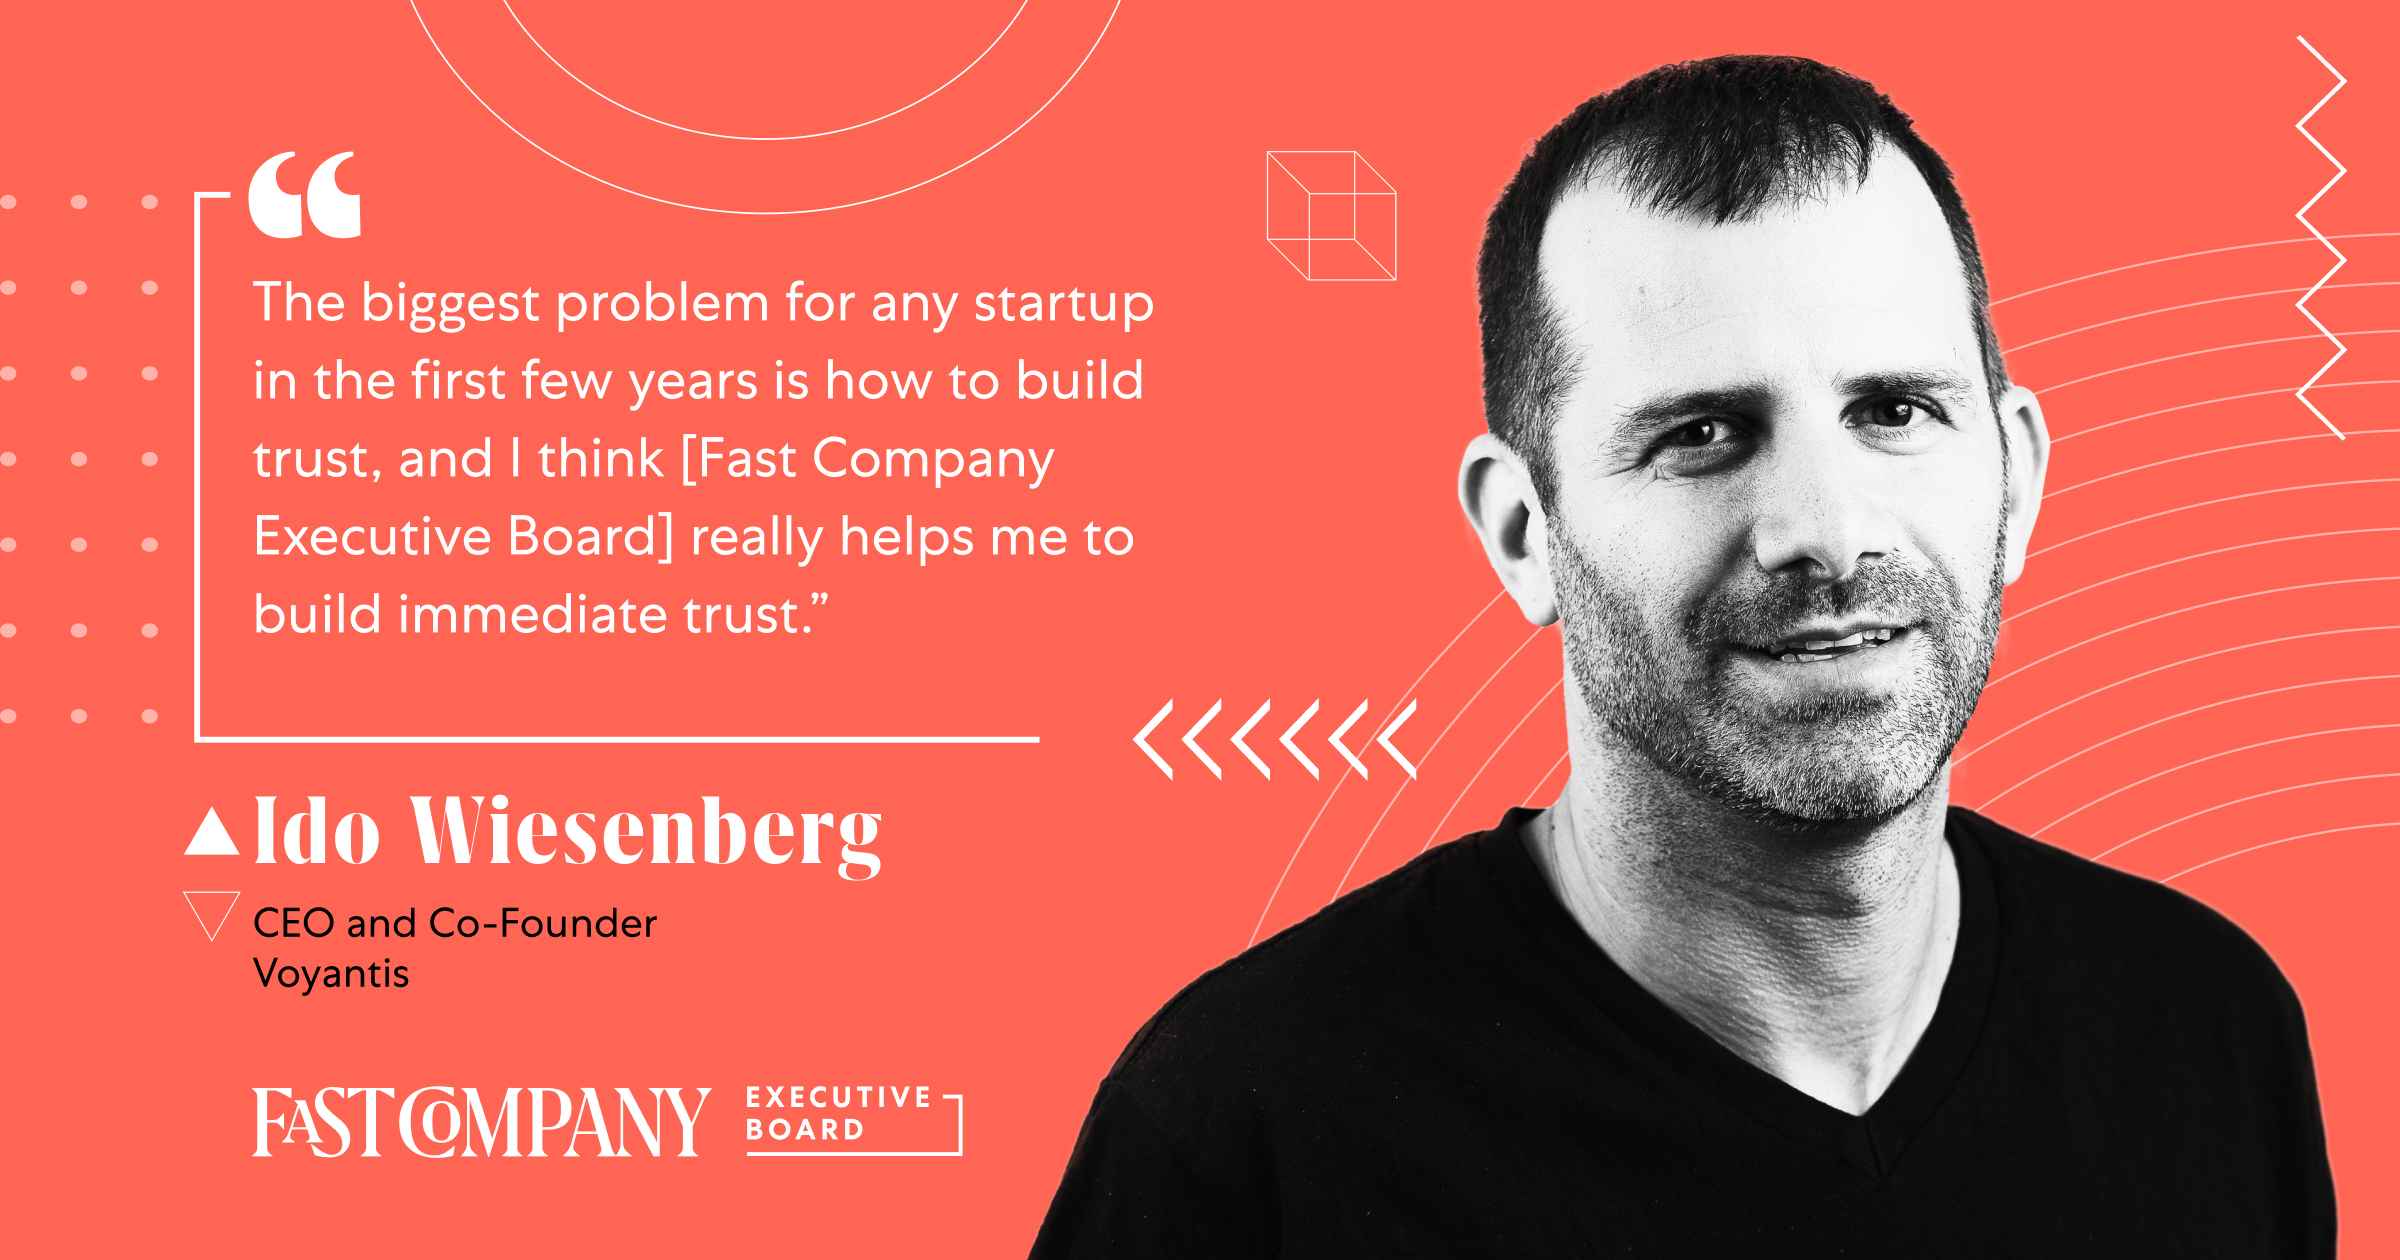 Fast Company Executive Board Helps Build Trust for Ido Wiesenberg’s Startup